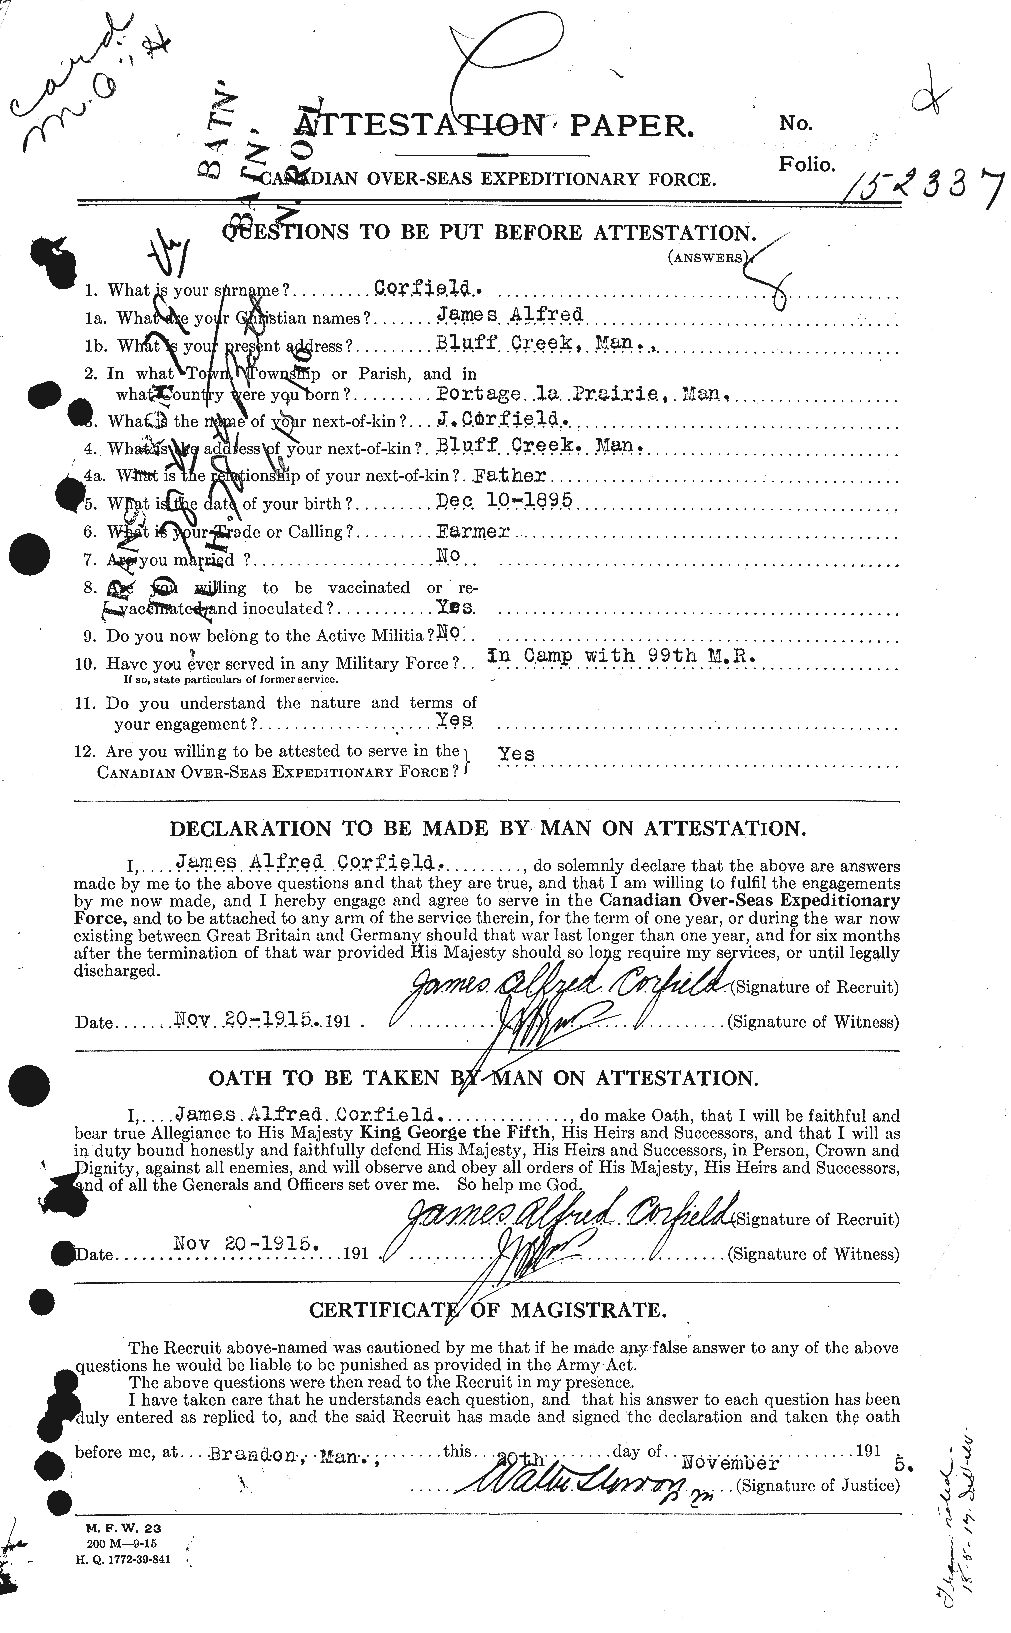 Personnel Records of the First World War - CEF 054383a